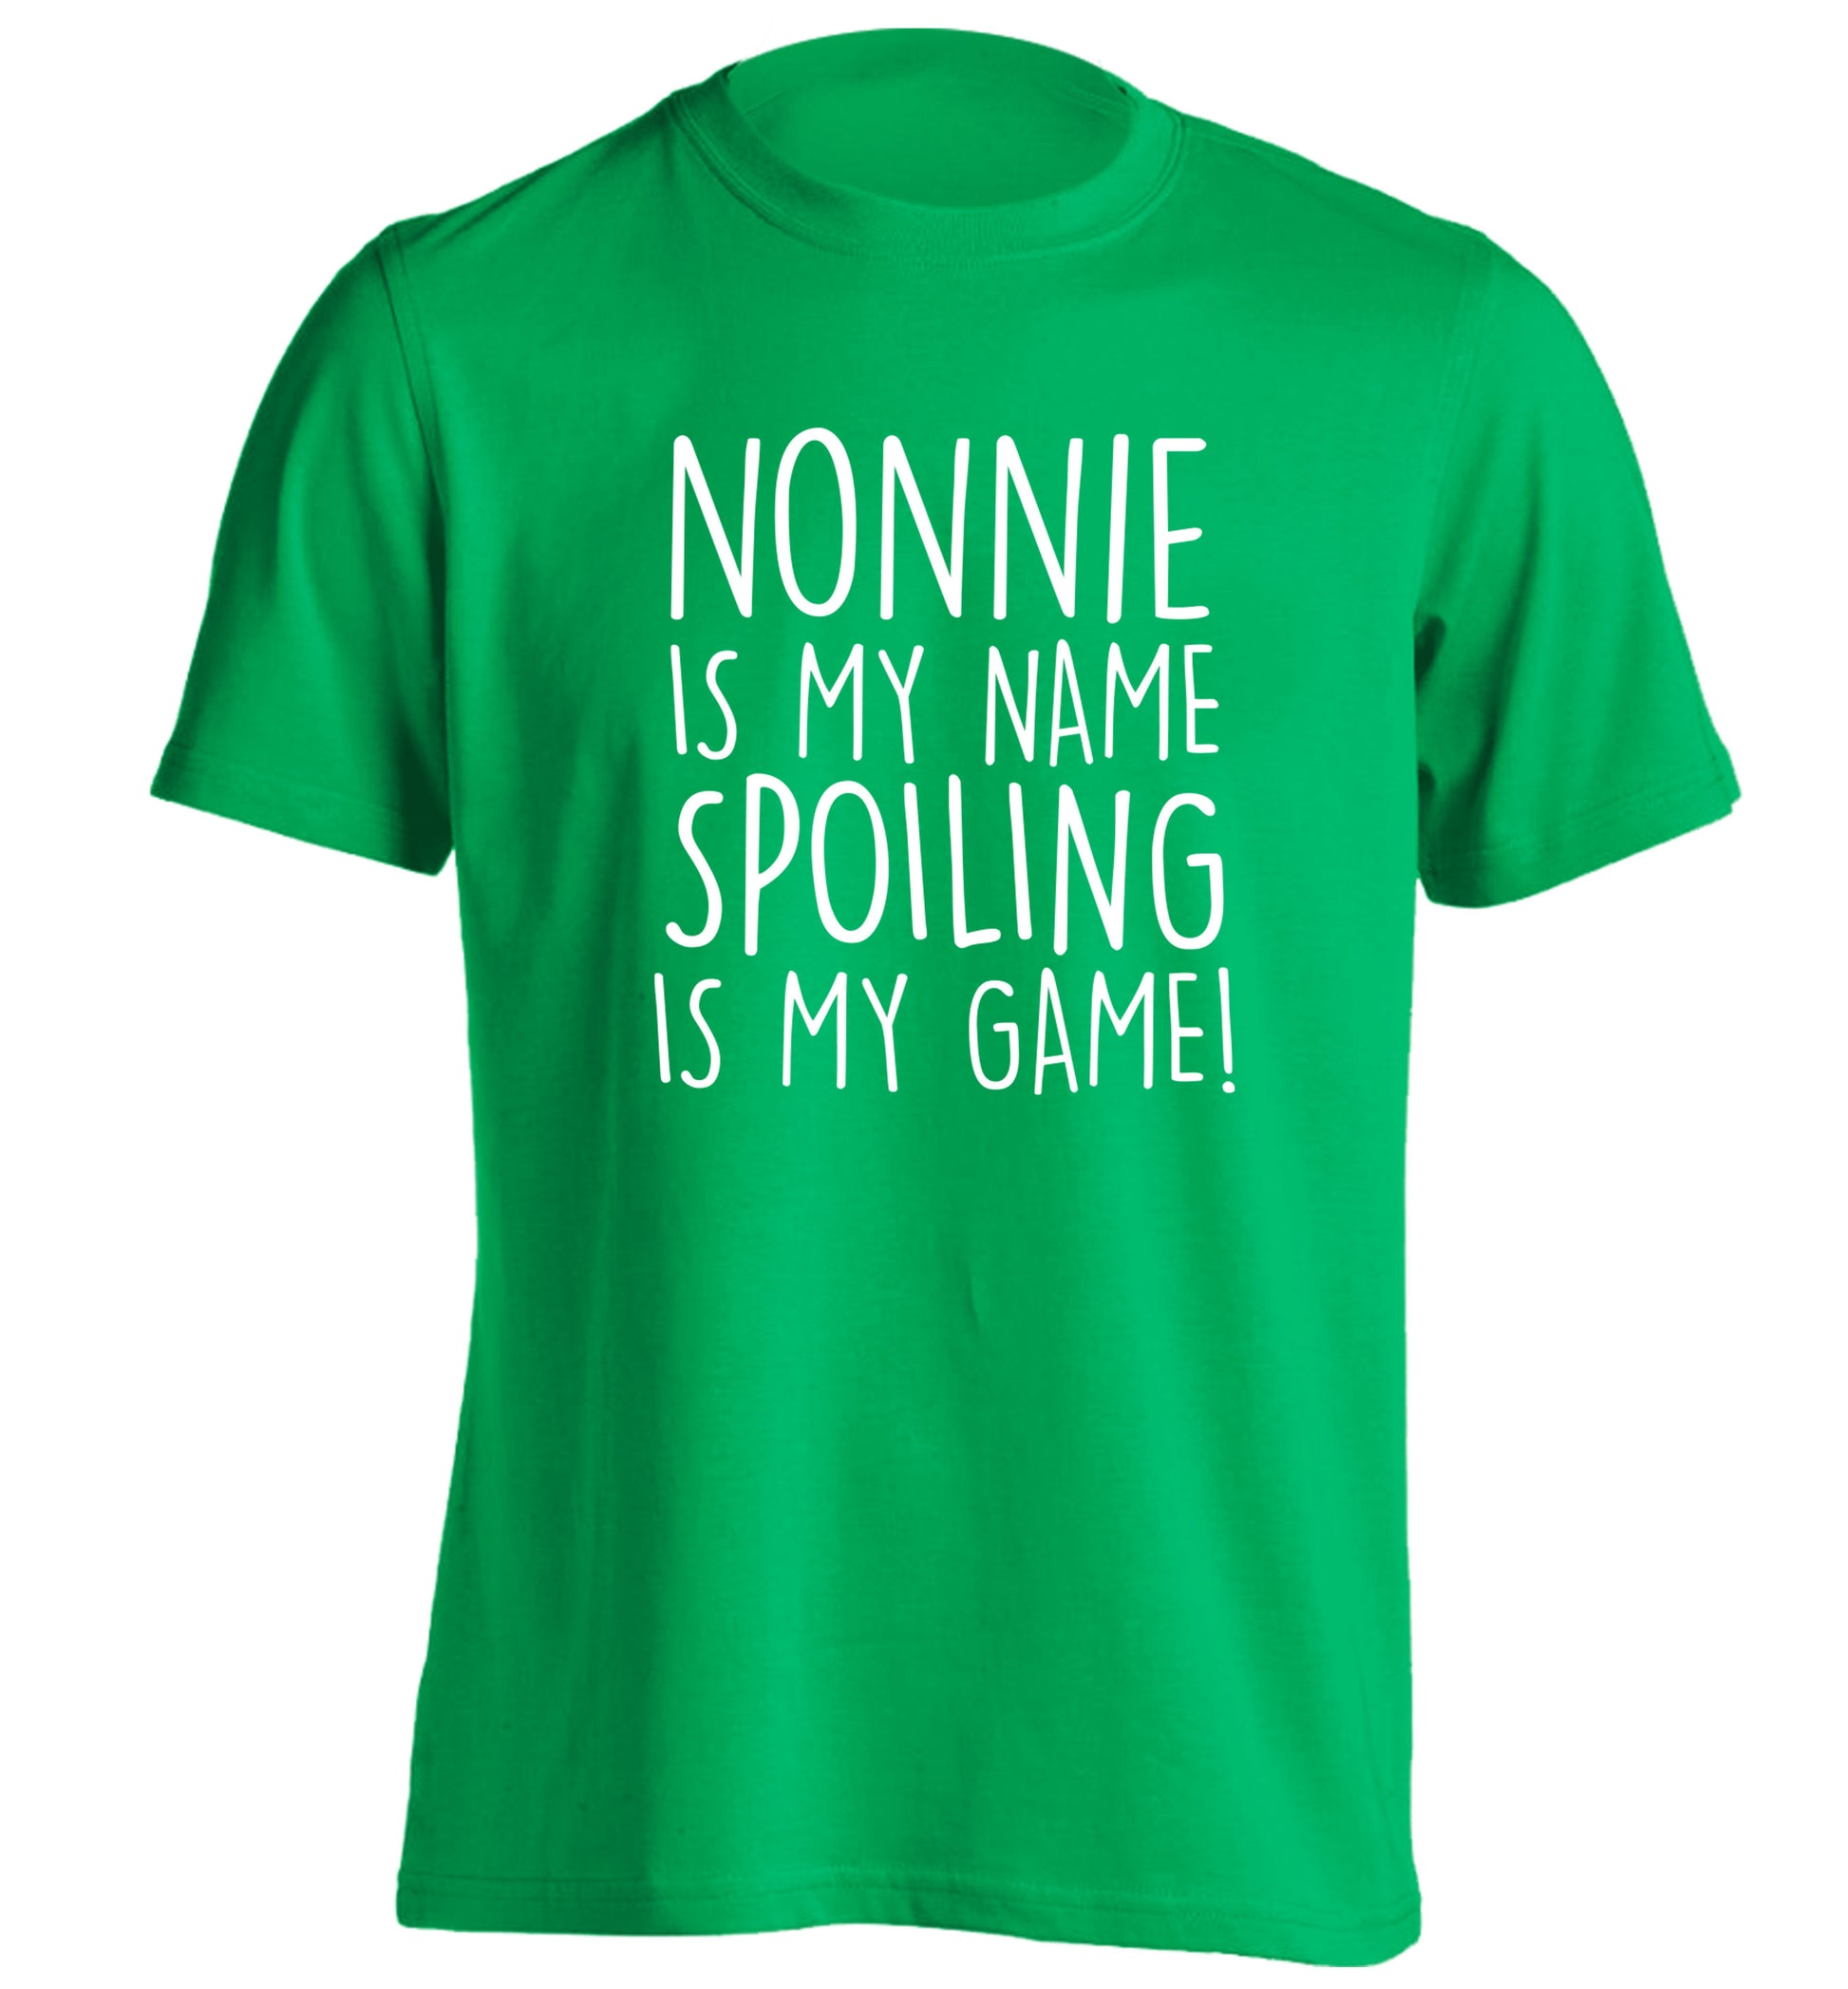 Nonnie is my name, spoiling is my game adults unisex green Tshirt 2XL